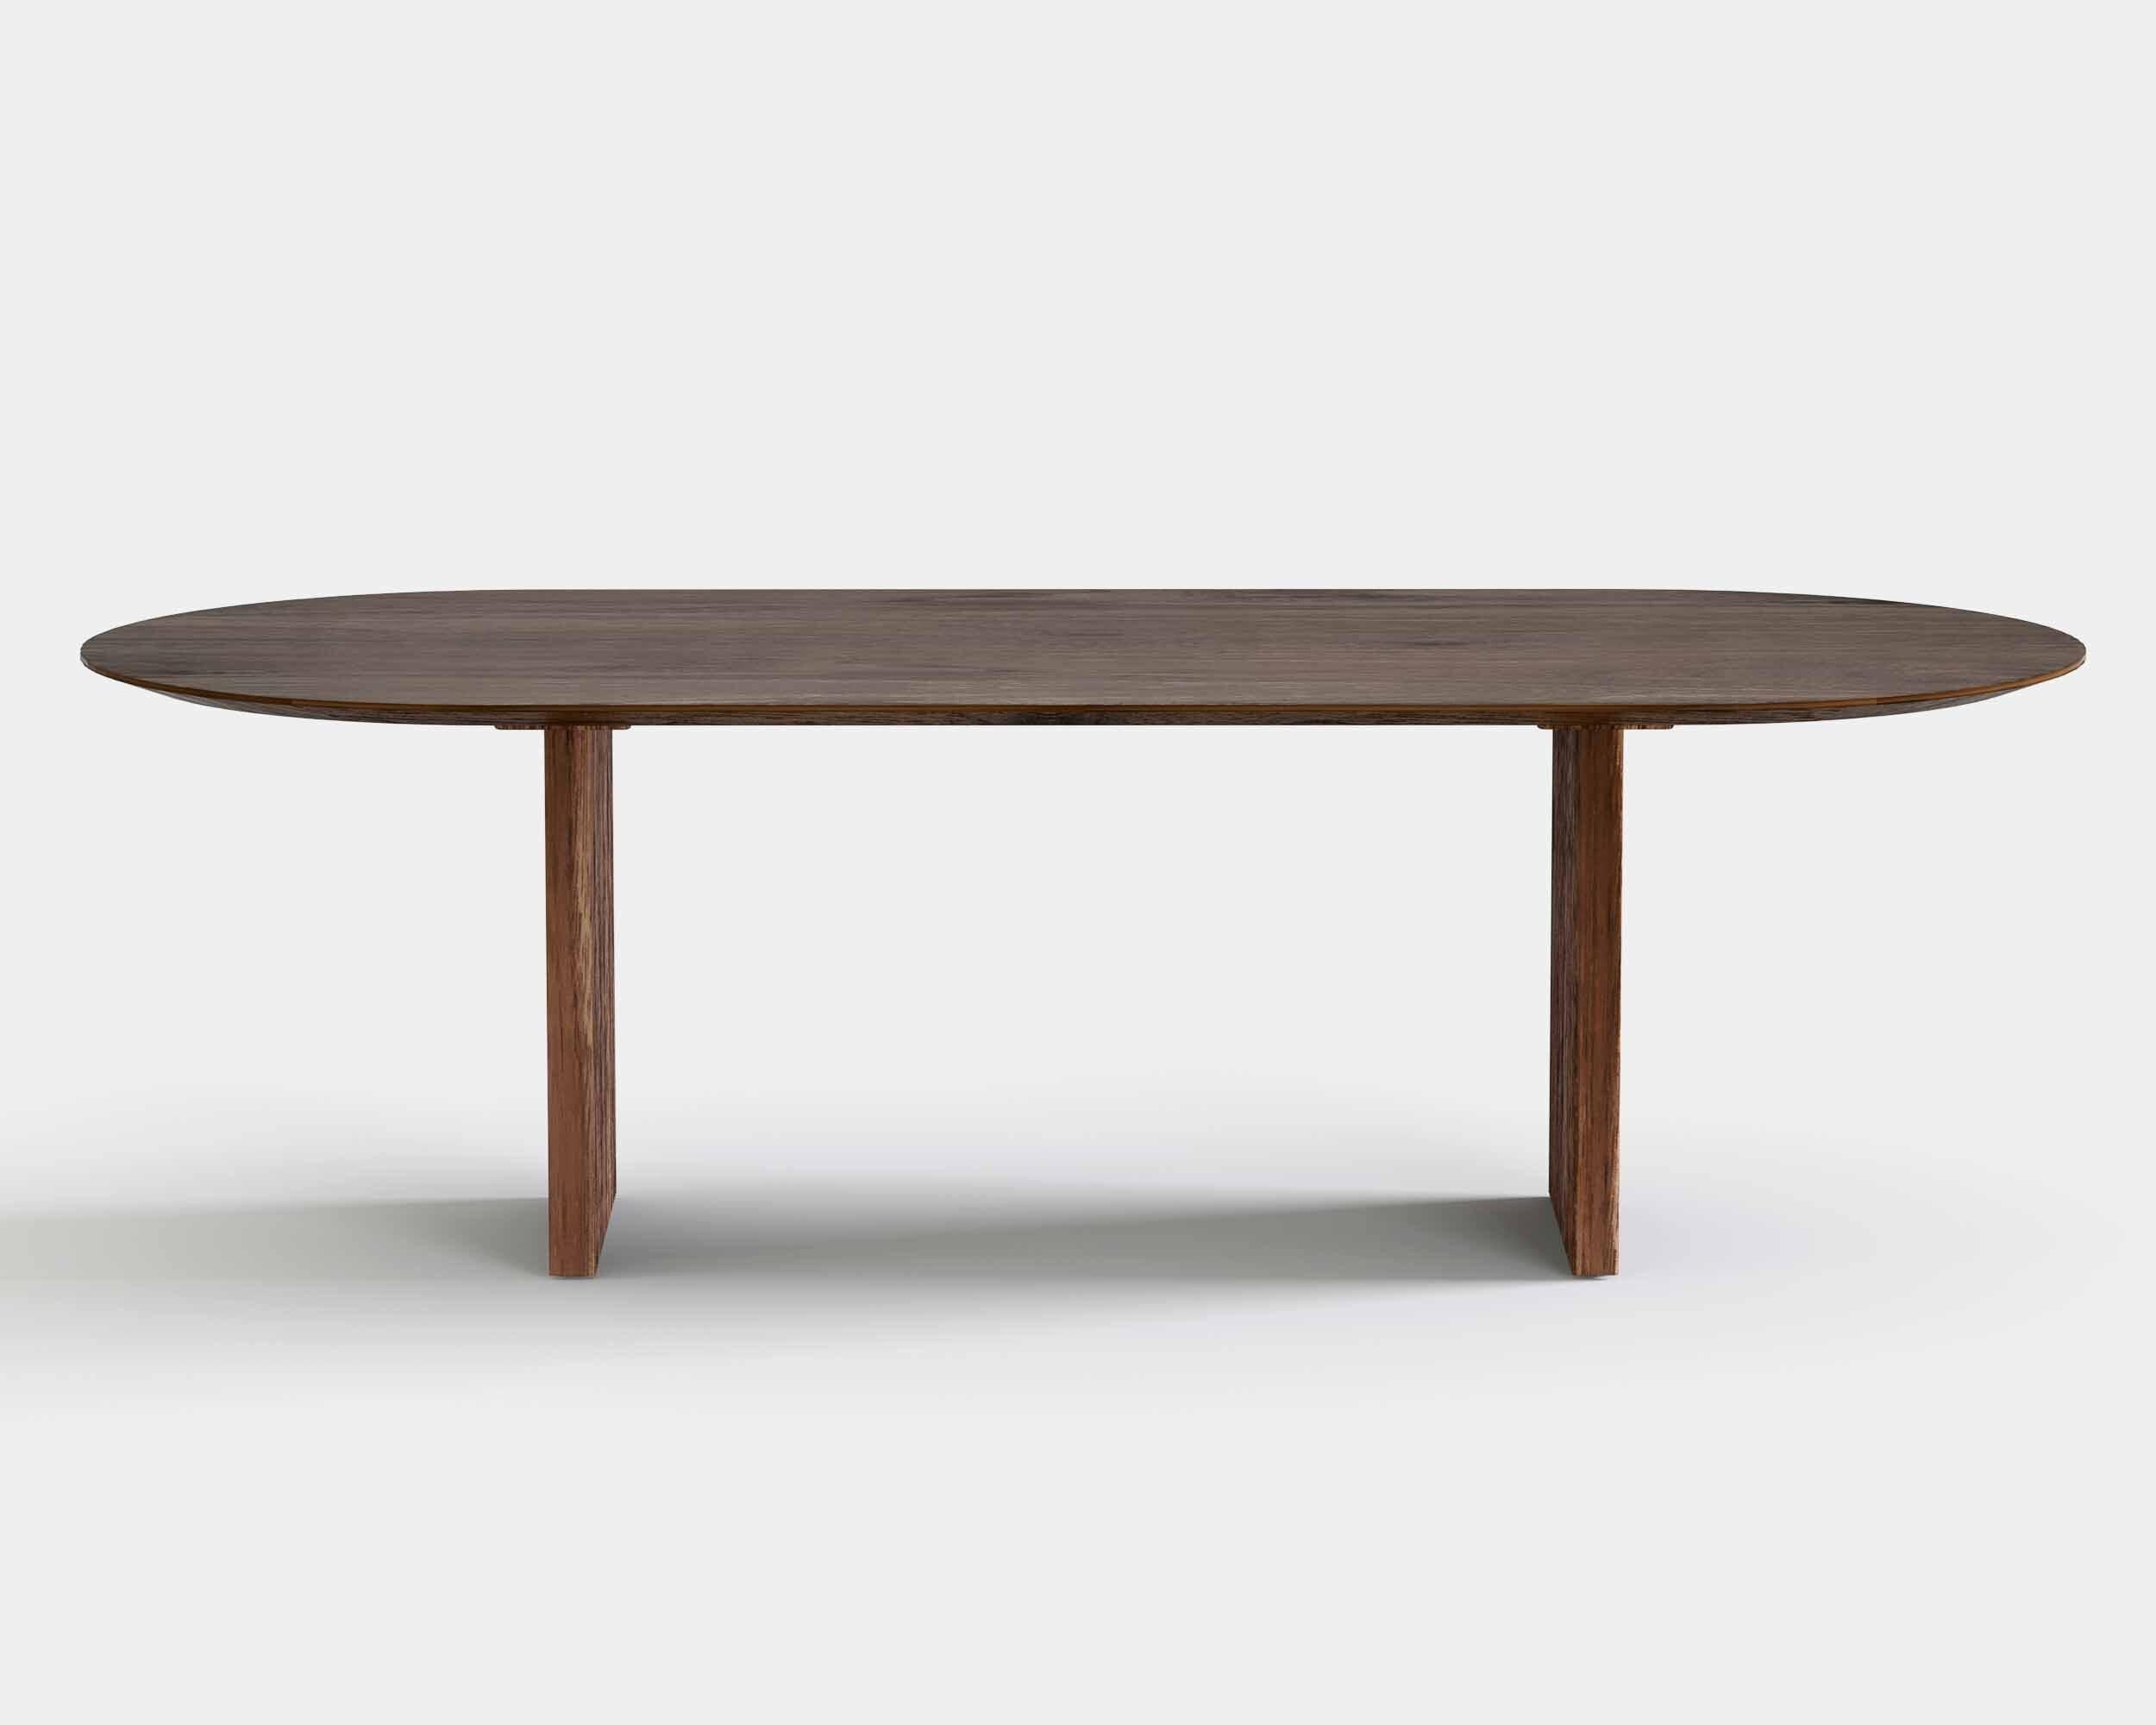 Ten dining table, oval, 400 cm.
Solid wood table top and legs. Handmade in Denmark. 

Measures: height: 72 or 74 cm

Table top dimensions:
– 200 x 95 cm
– 240 x 105 cm
– 270 x 105 cm
– 300 x 105 cm
– 340 x 105 cm
– 370 x 105 cm
– 400 x